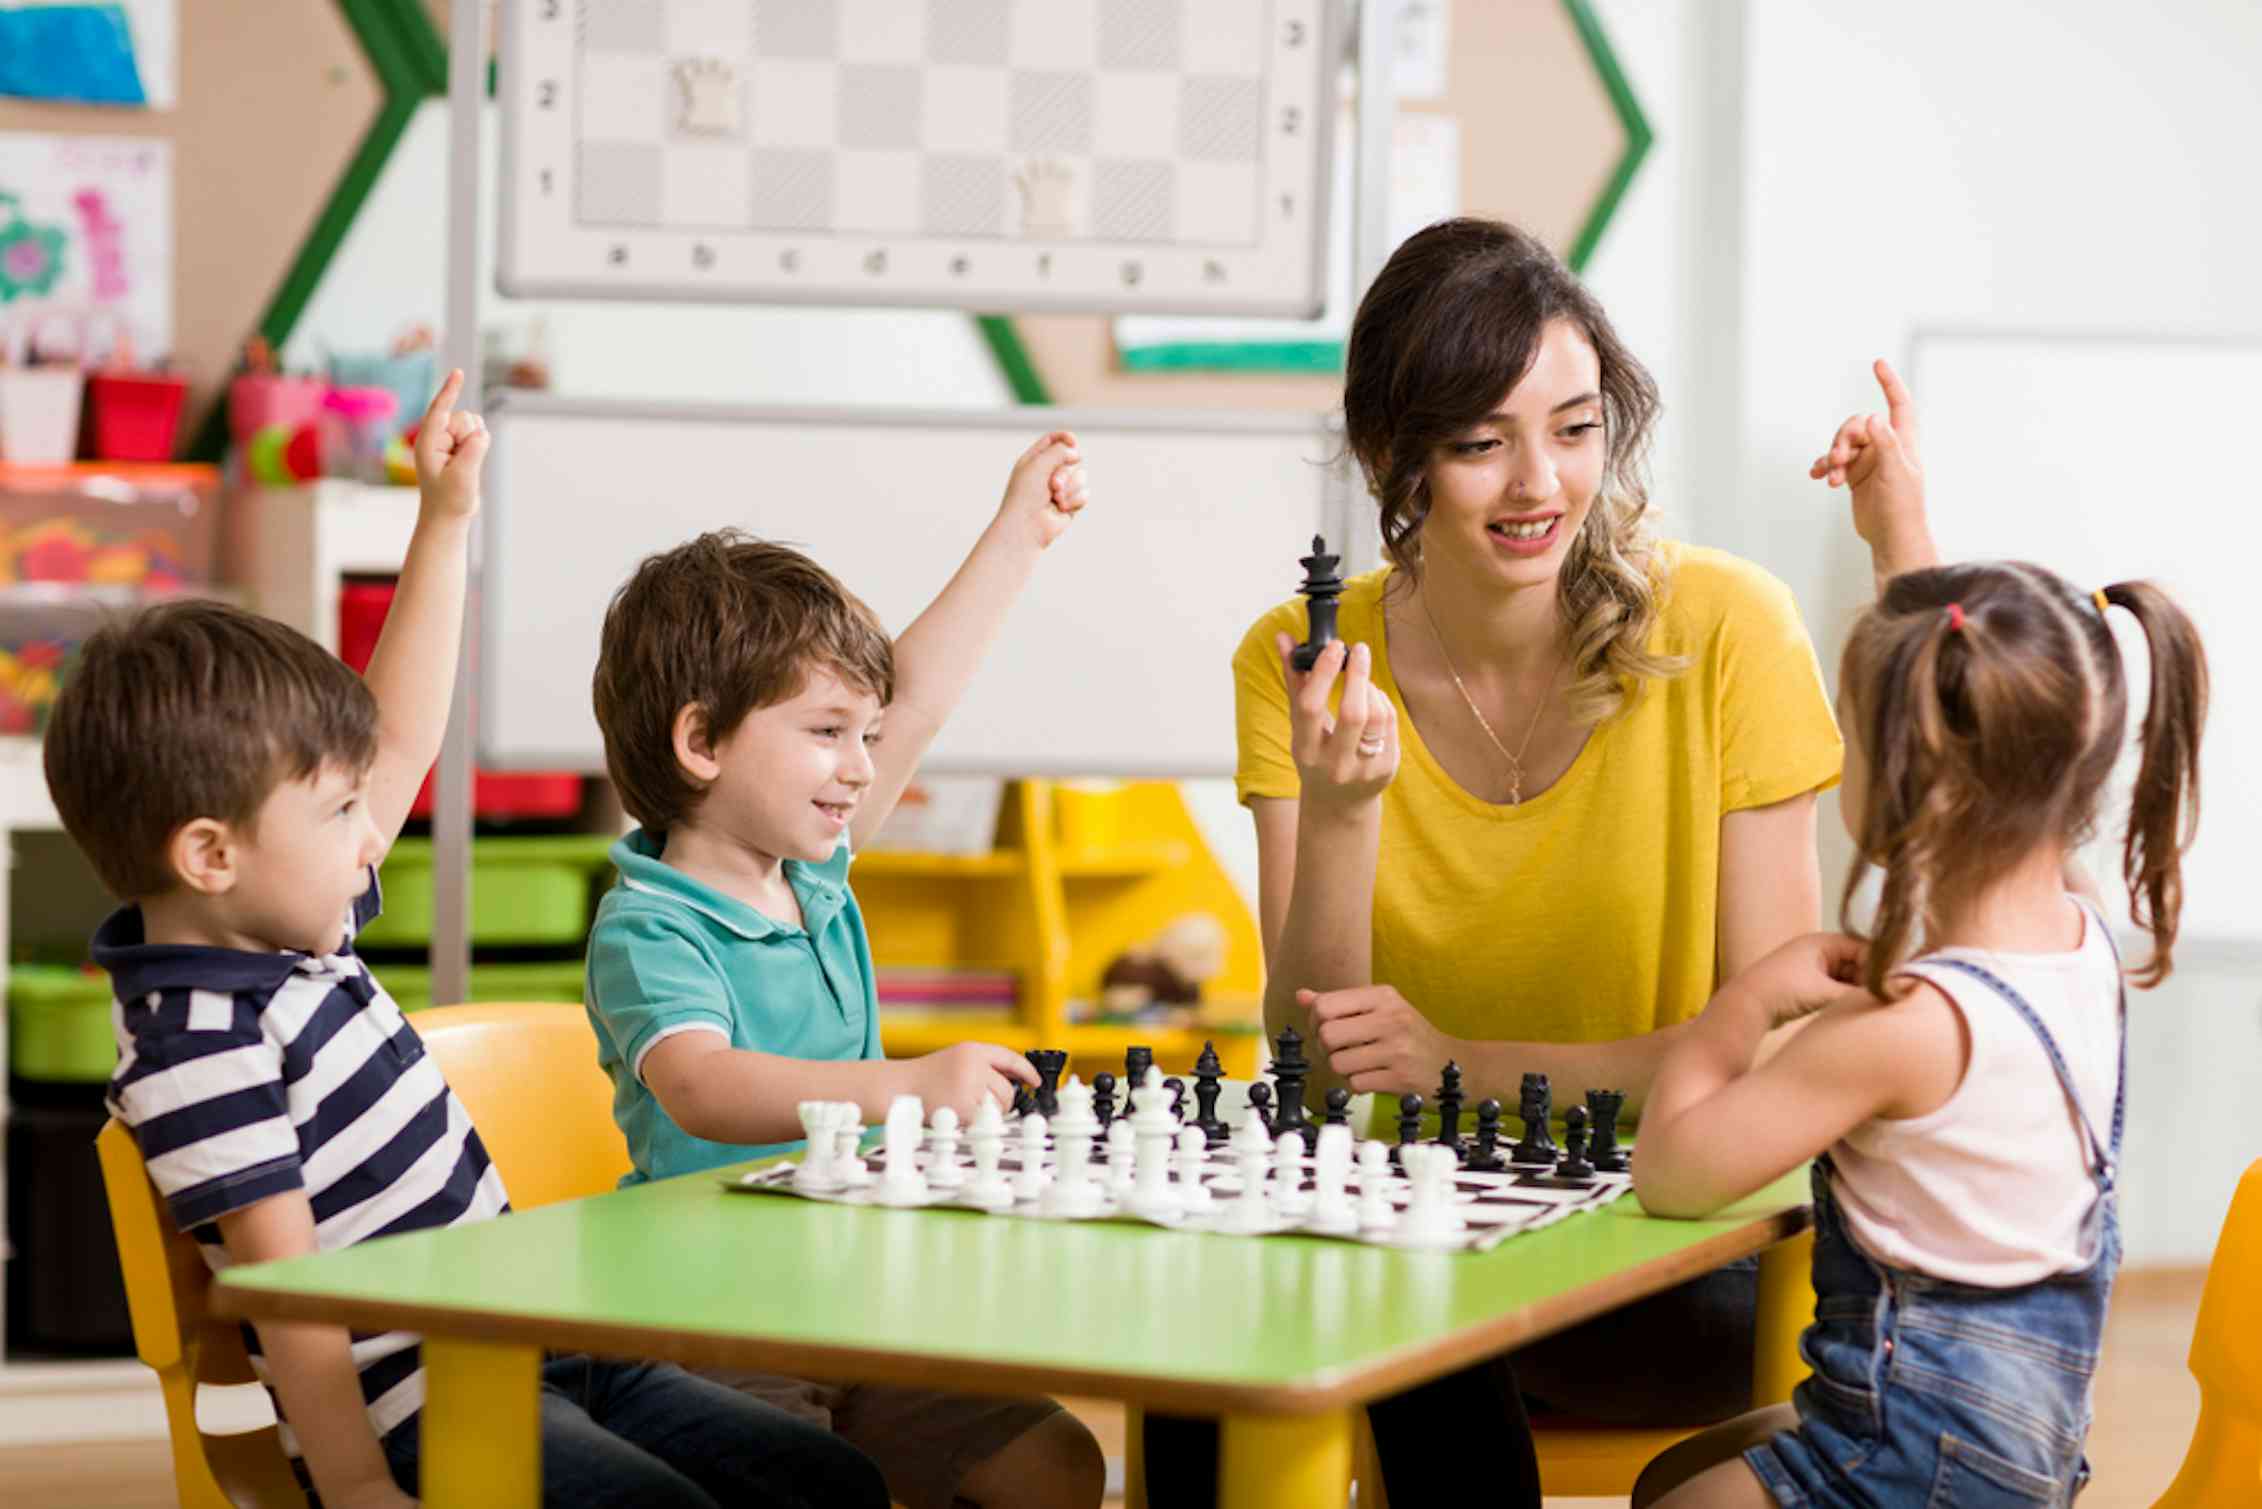 A woman and three young children sit around a table with a chess board. The woman holds a chess piece in her hand while the children raise their arms.